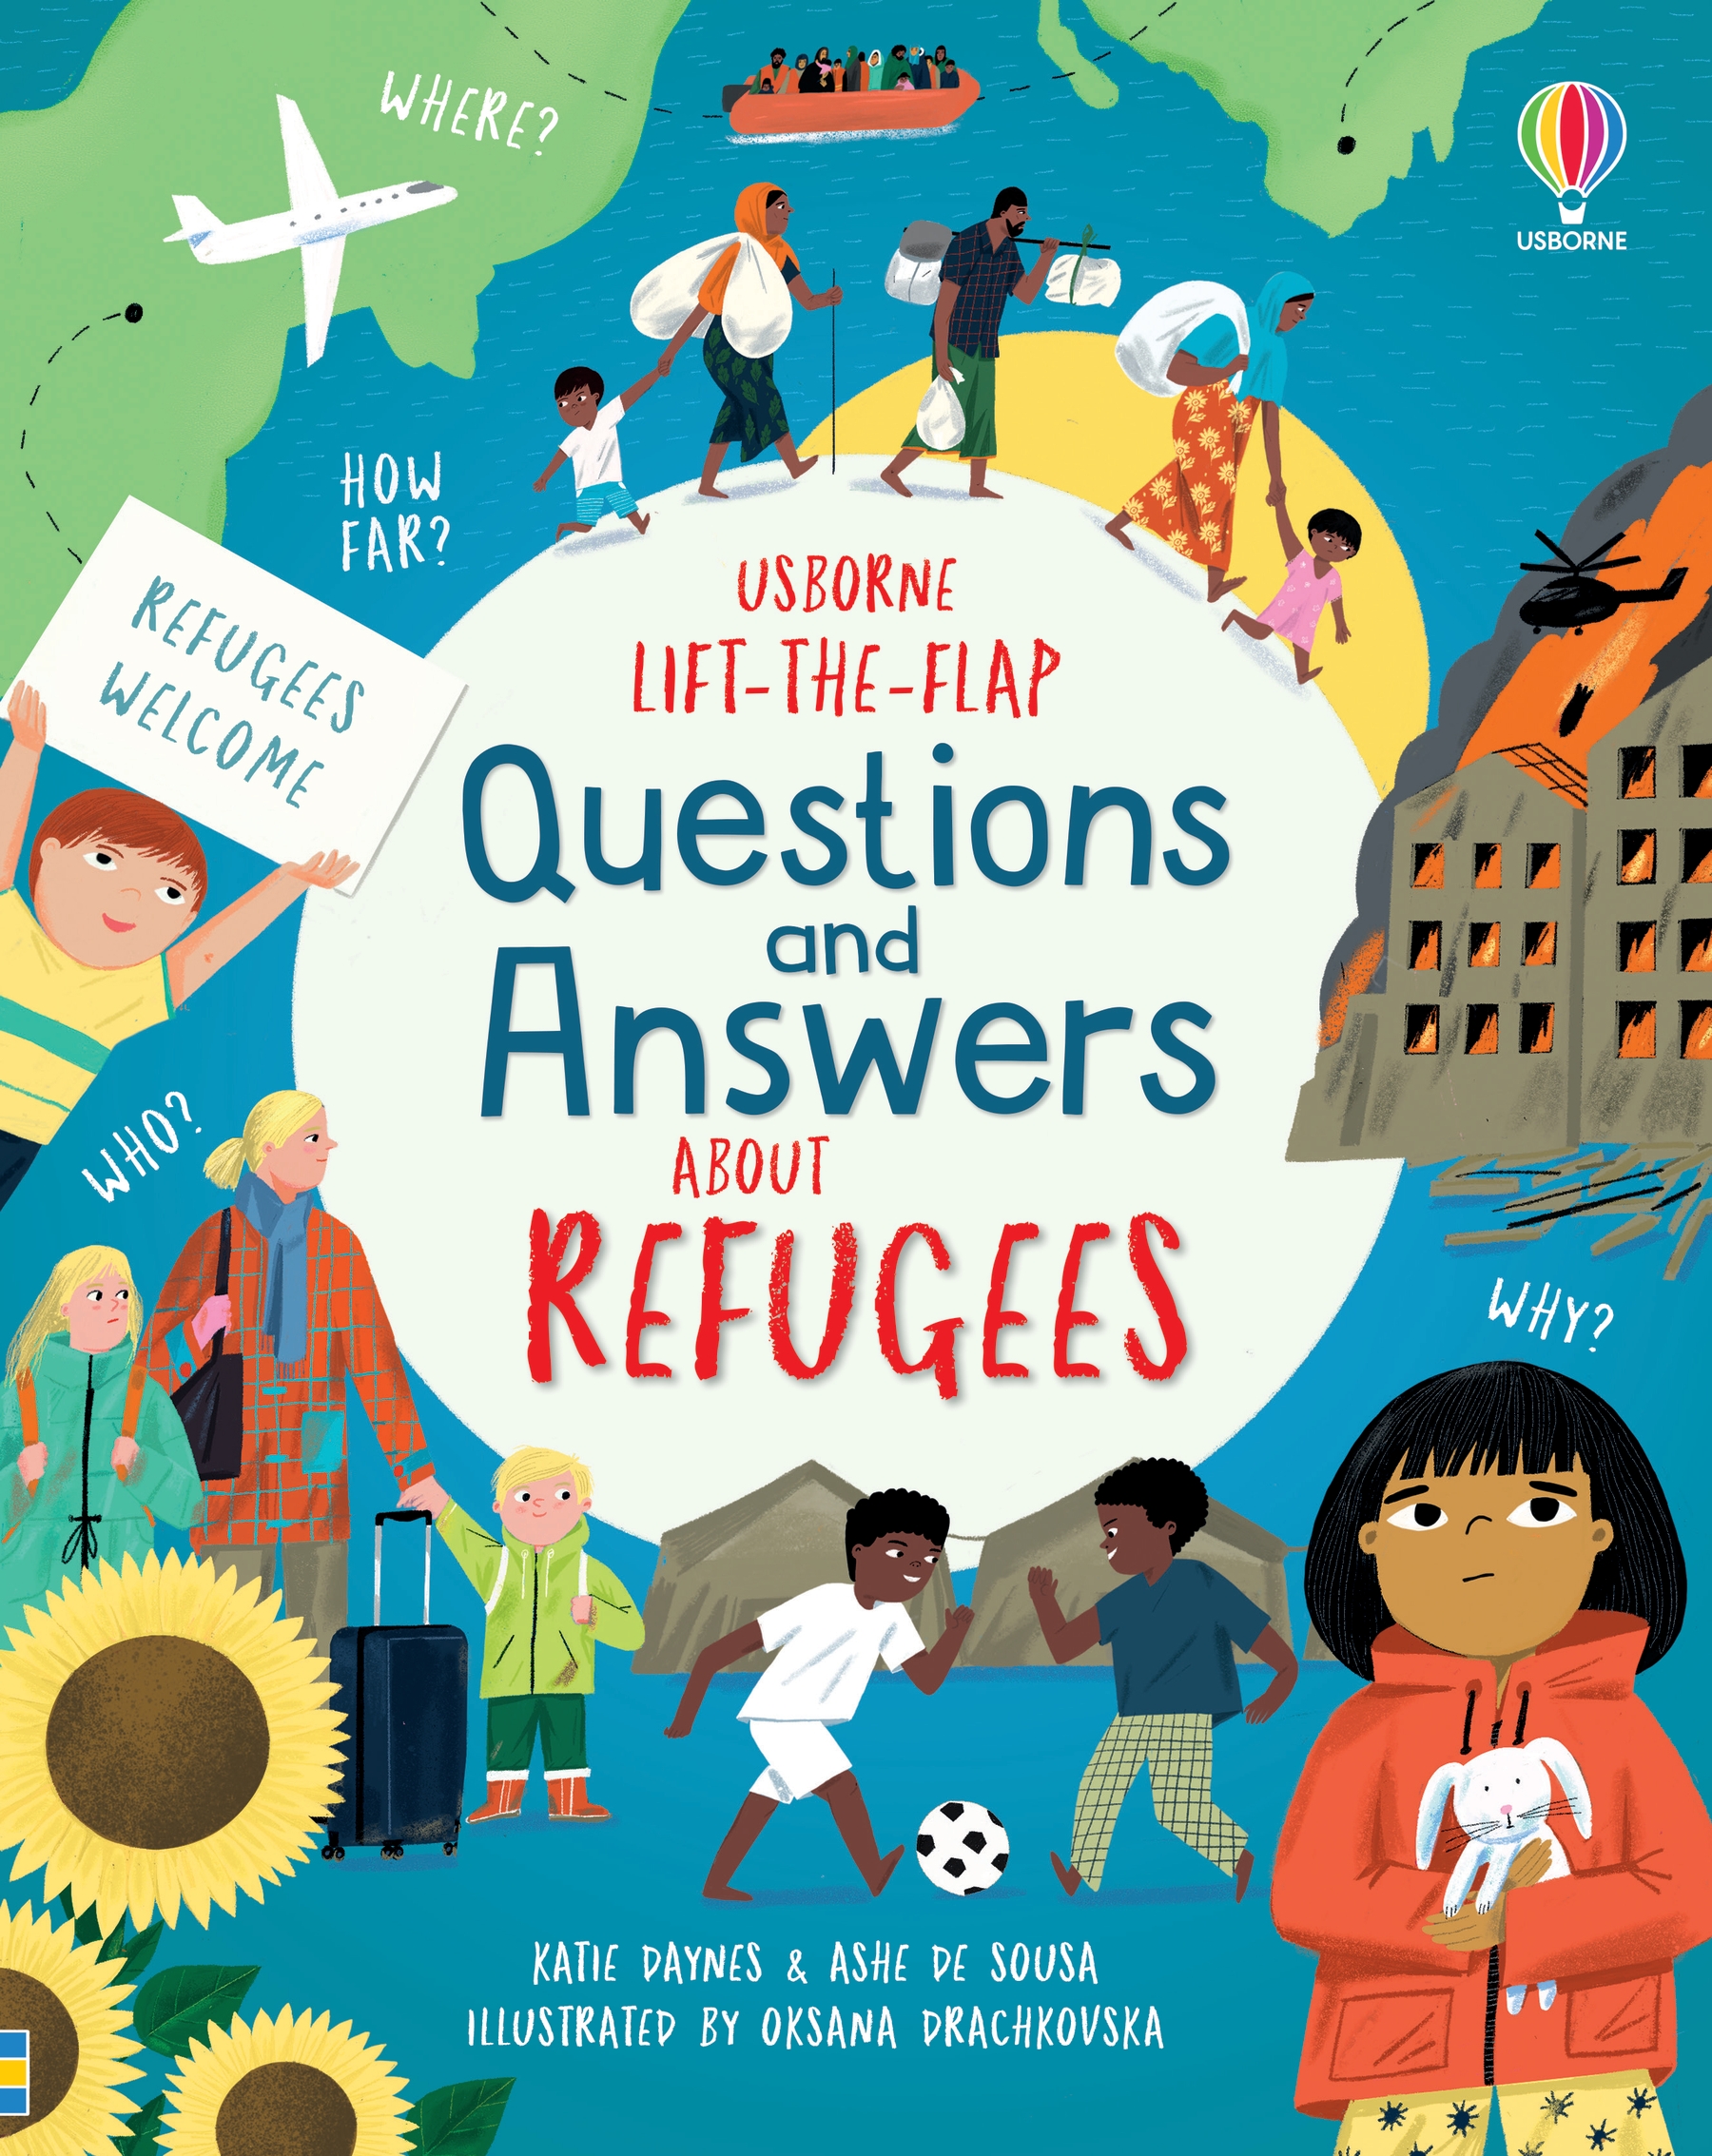 Lift-the-flap Questions and Answers about Refugees, Usborne